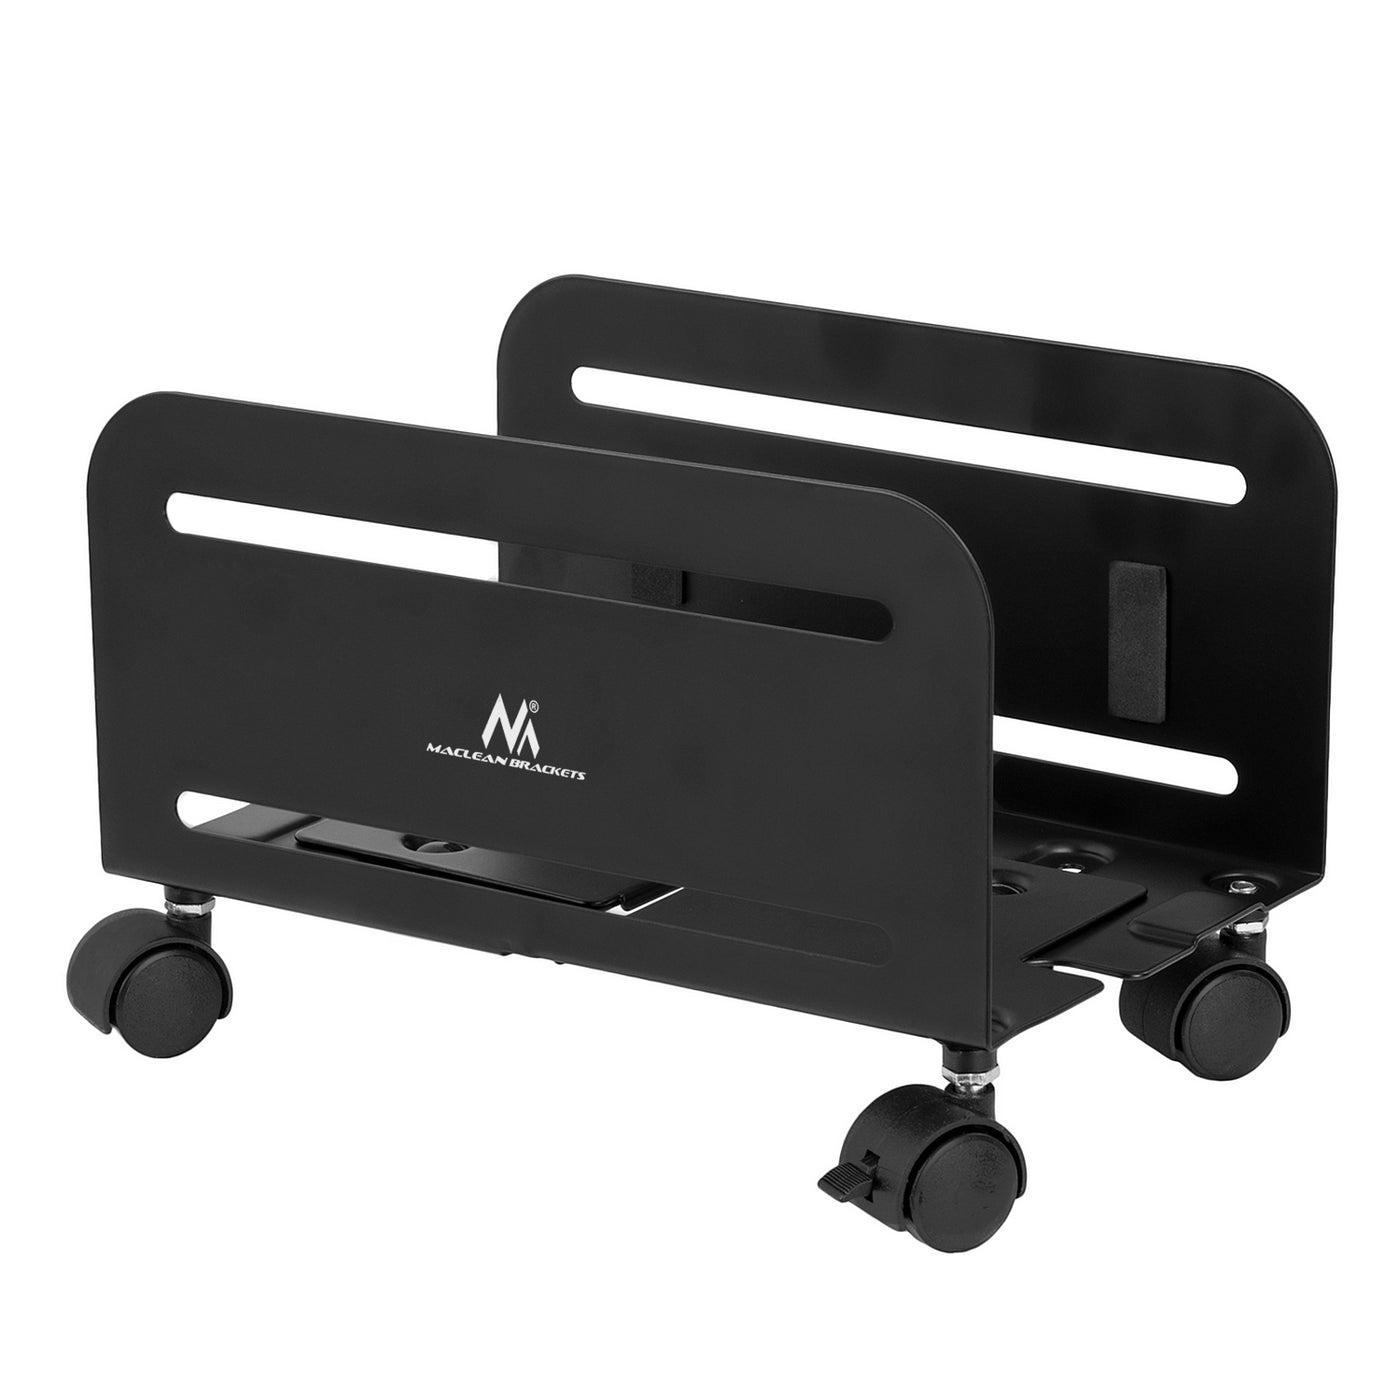 Universal Computer Stand Cart with wheels Mobile CPU up to 10kg Cart PC Desktop